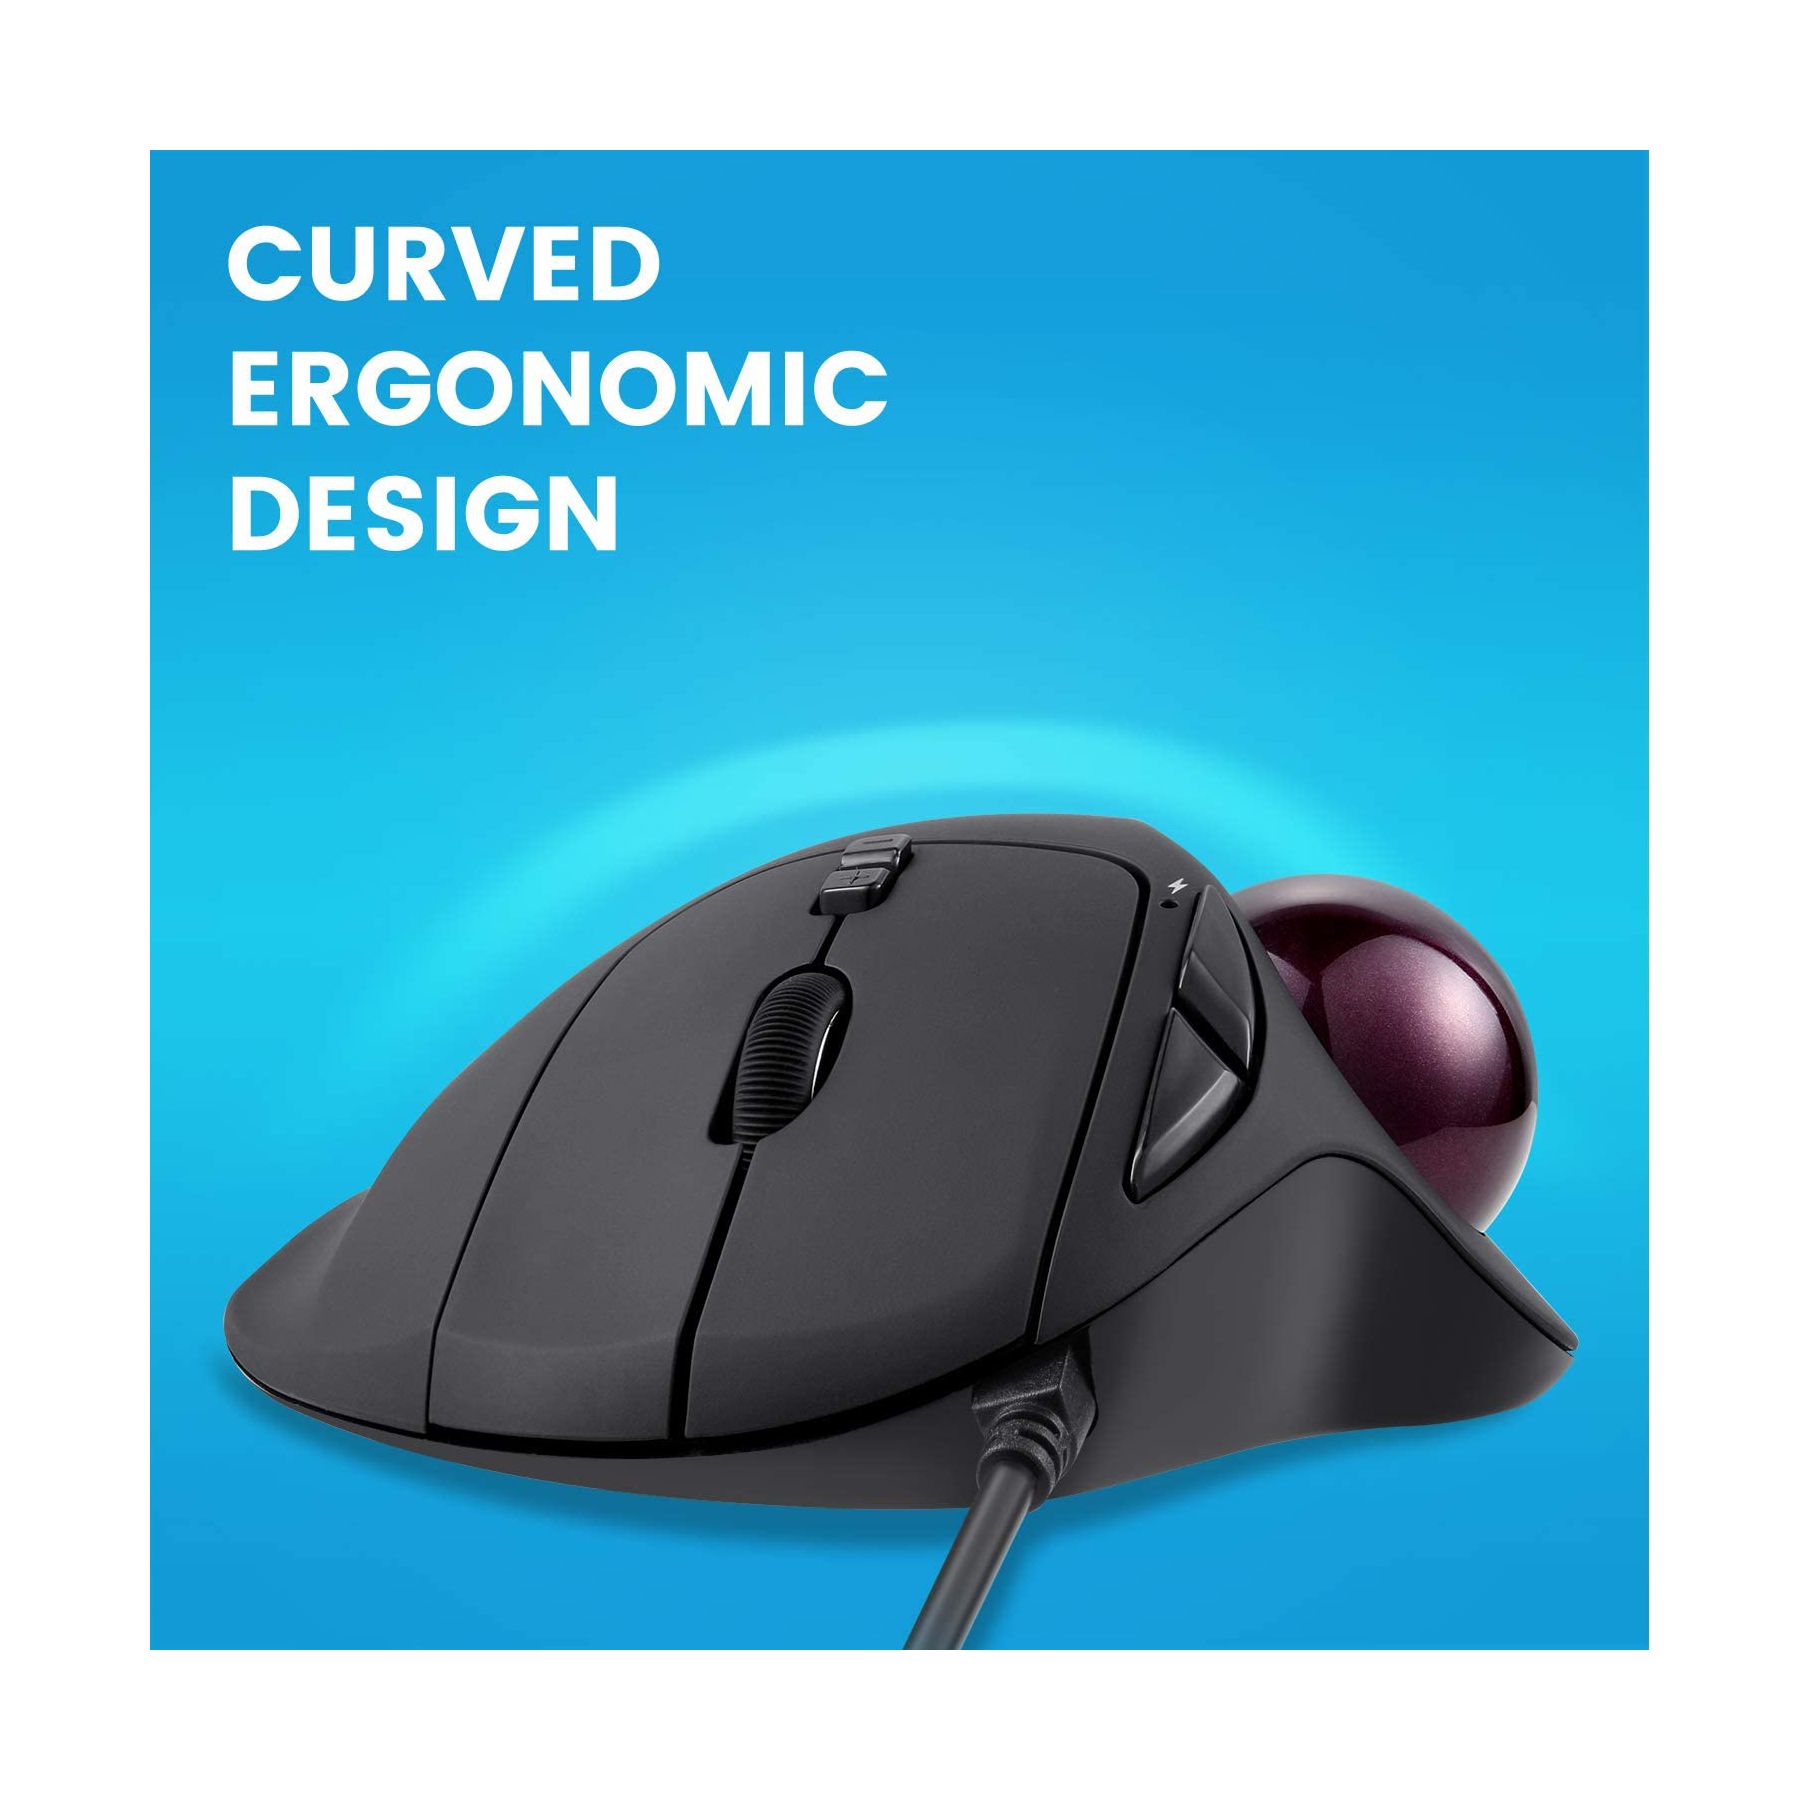 How to use a trackball mouse more efficiently? 